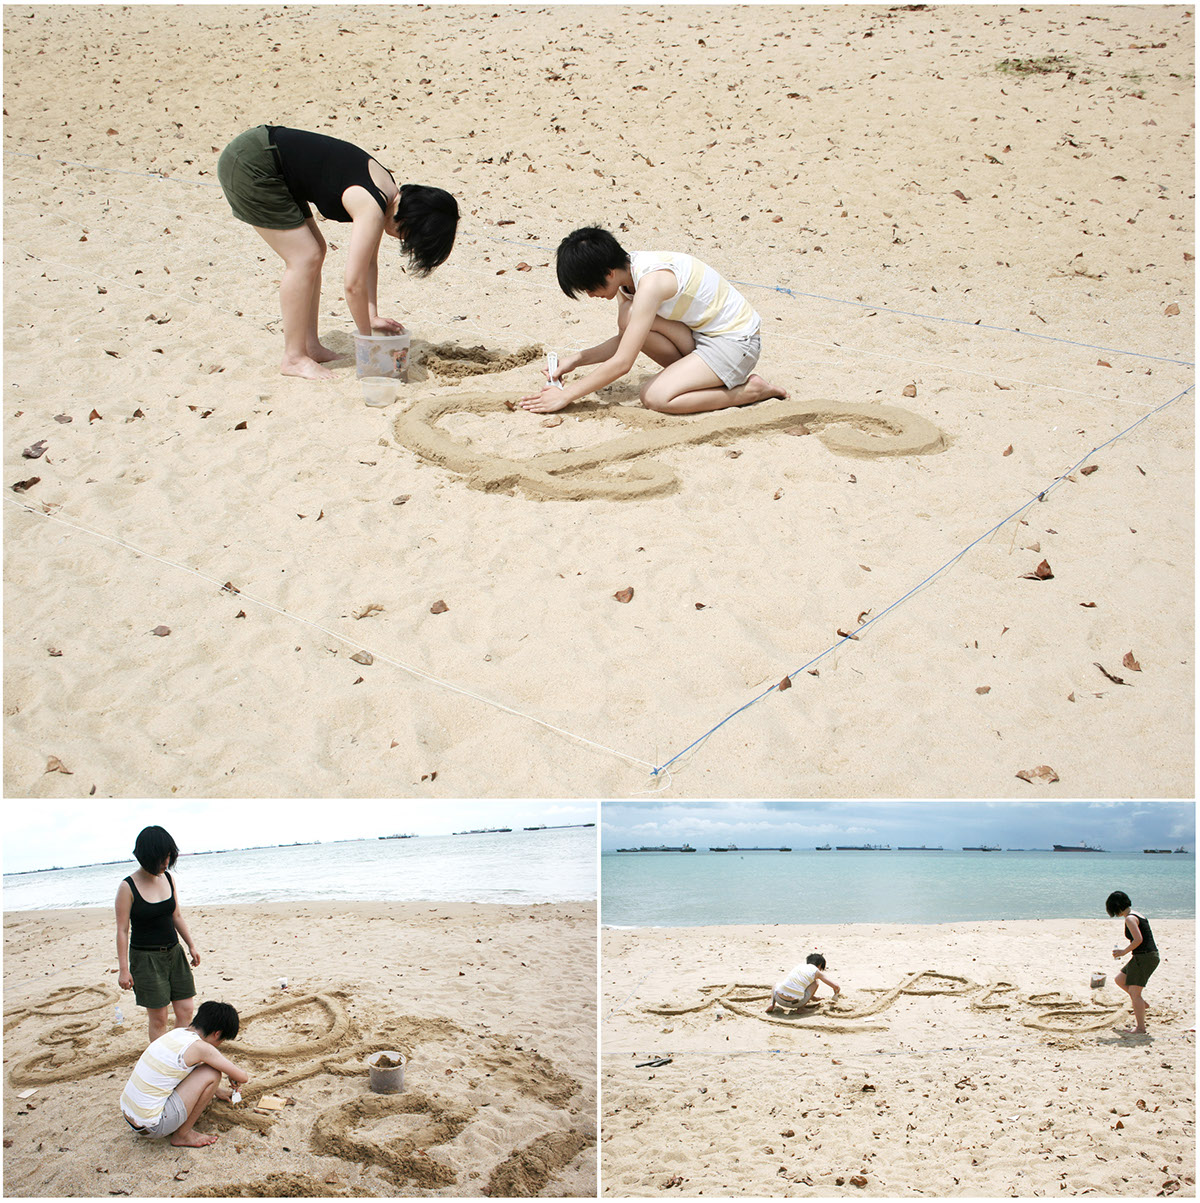 experimental process  design process  material Outdoor beach grass  childhood poster handmade  FOOD experiment  Play  mistake  exploration 